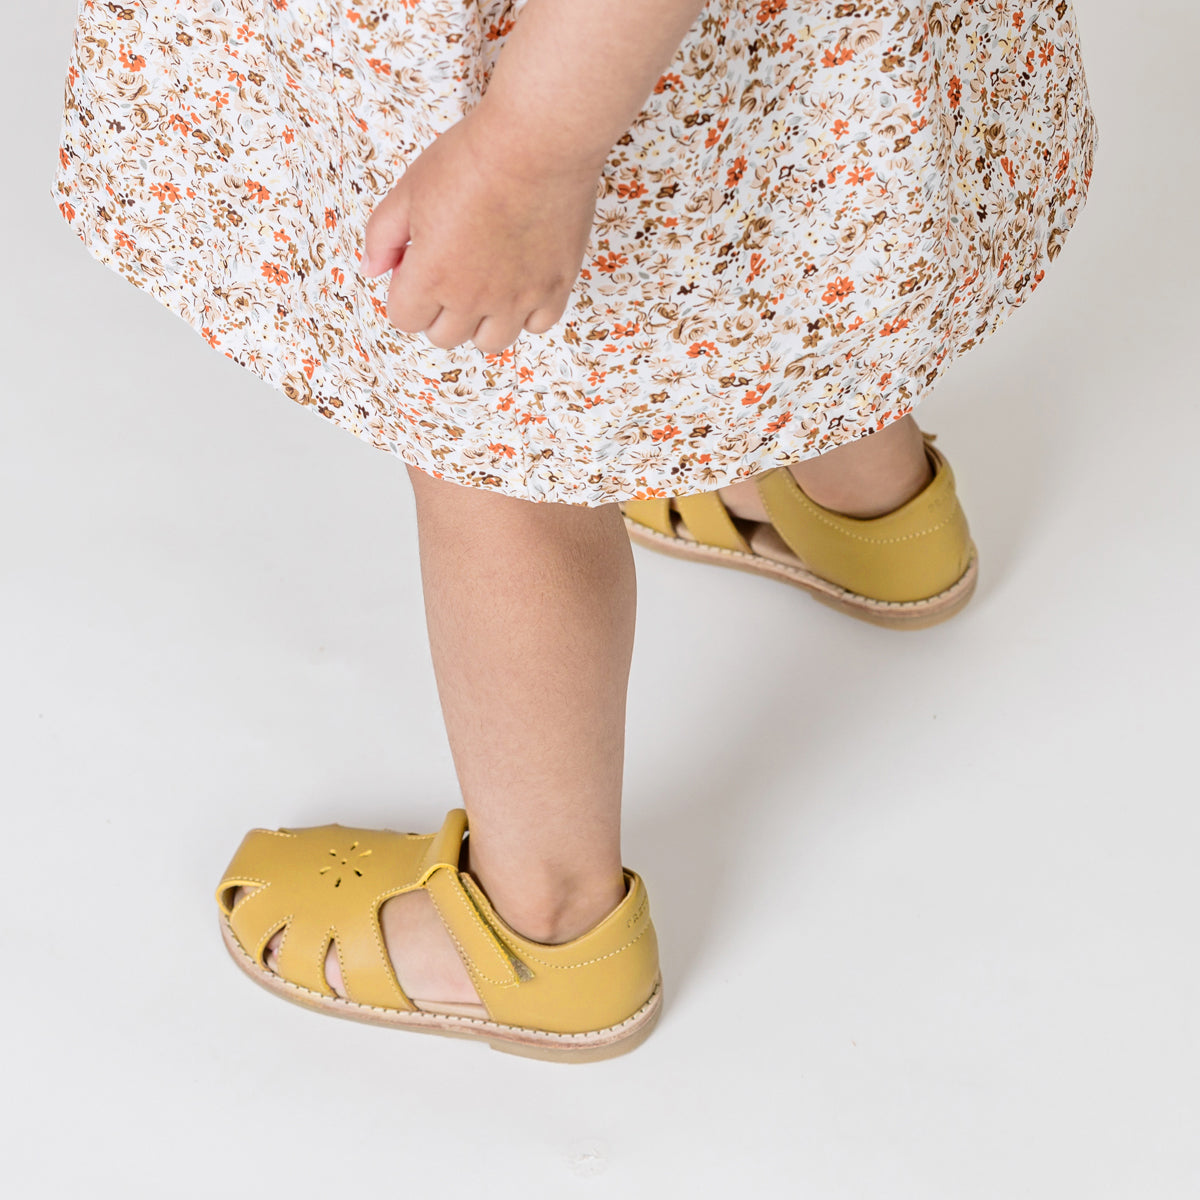 Toddler wearing Macy T-Bar shoes in honey colour and flower dress